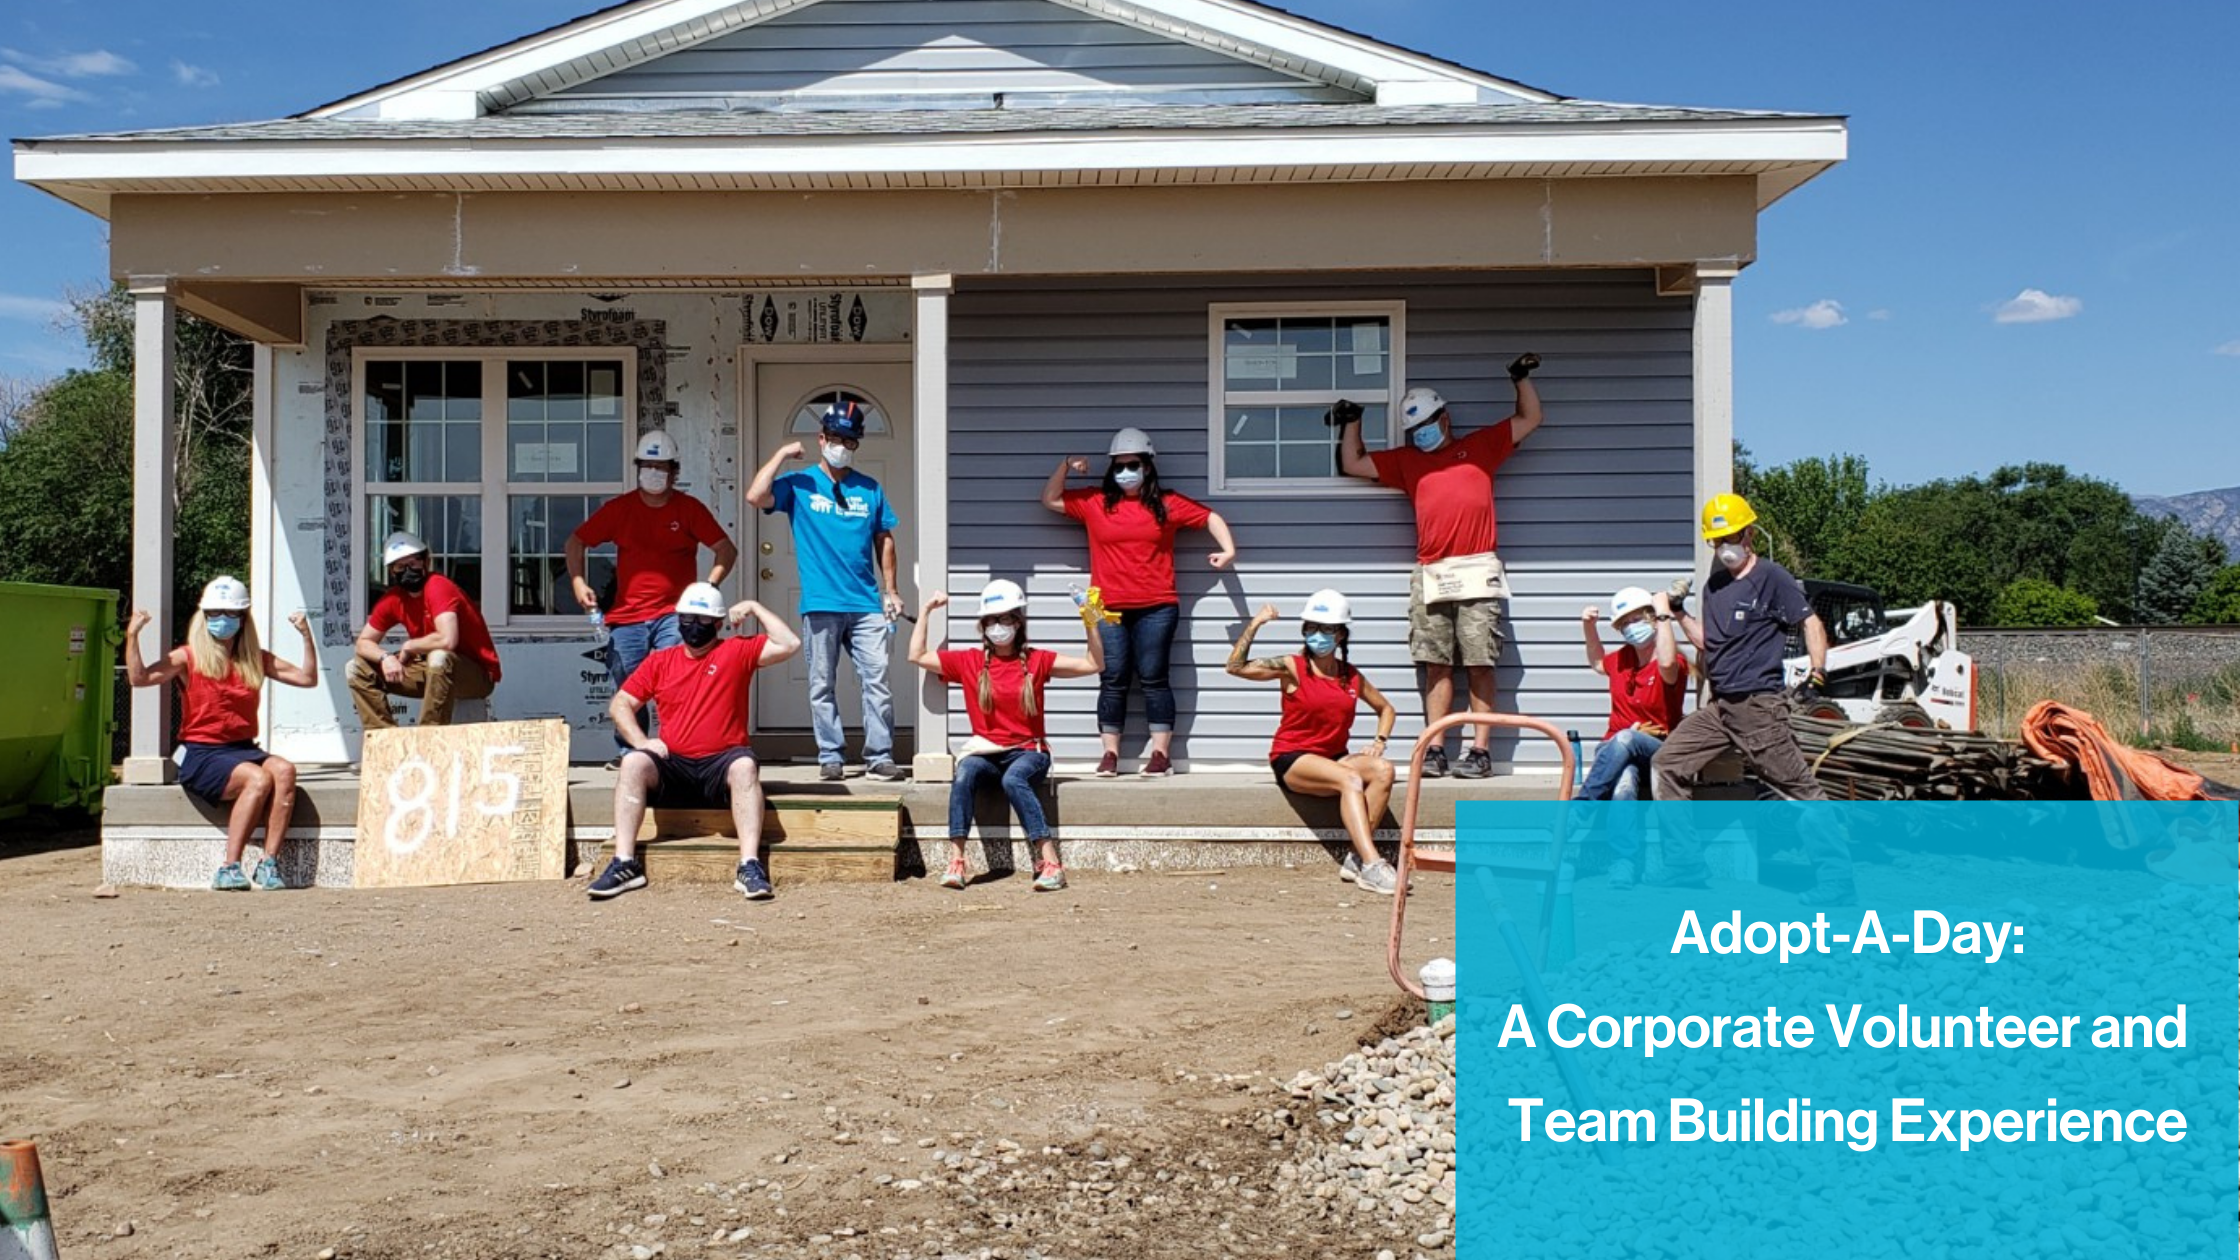 Adopt-A-Day: A Corporate Volunteer and Team-Building Experience